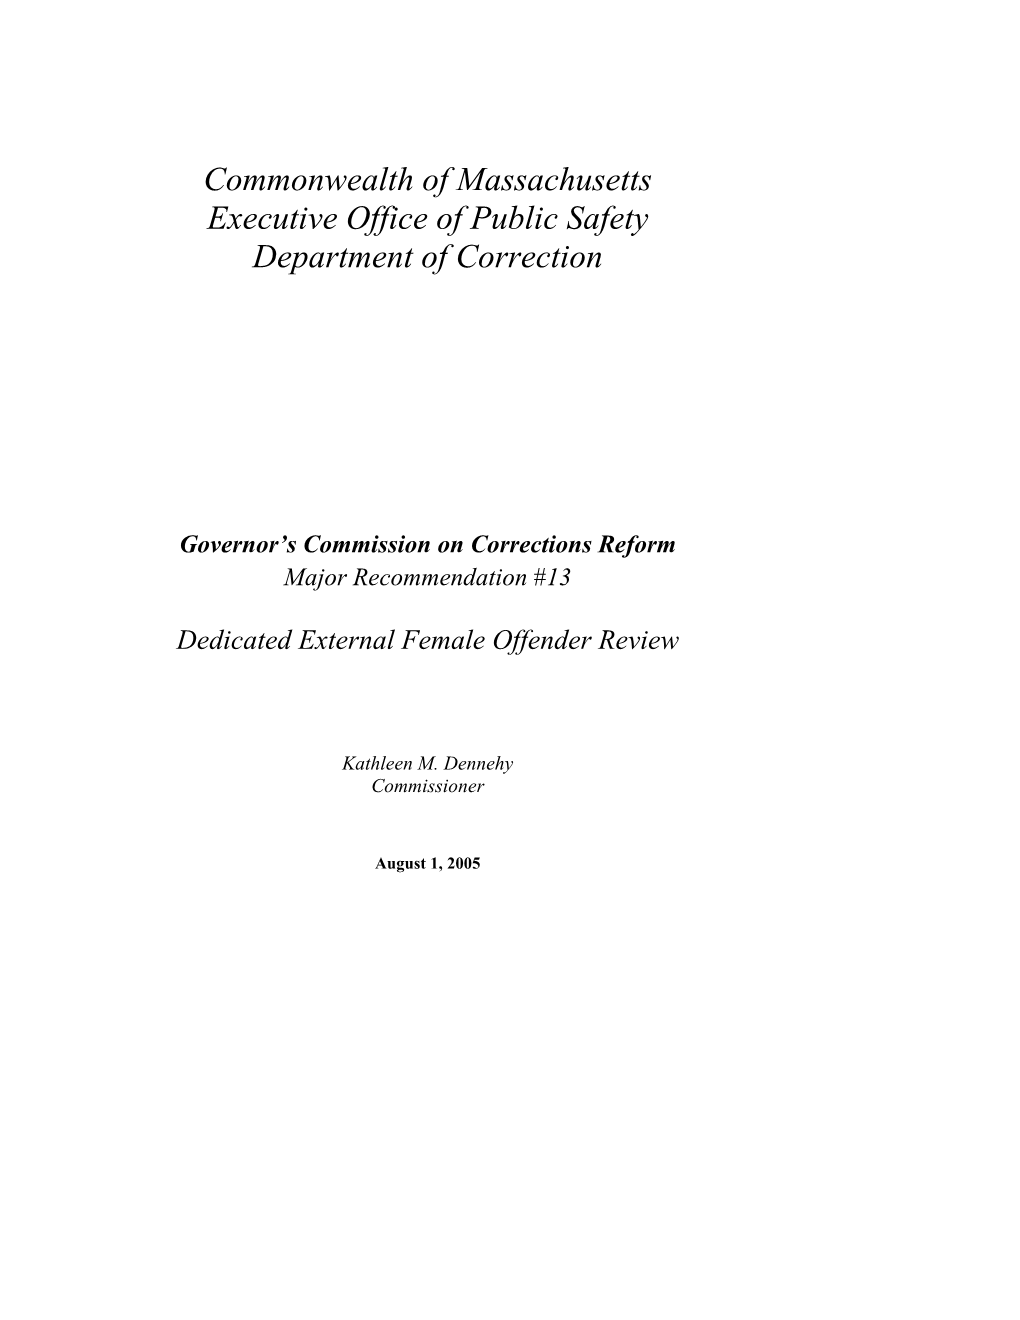 Commonwealth of Massachusetts Executive Office of Public Safety Department of Correction